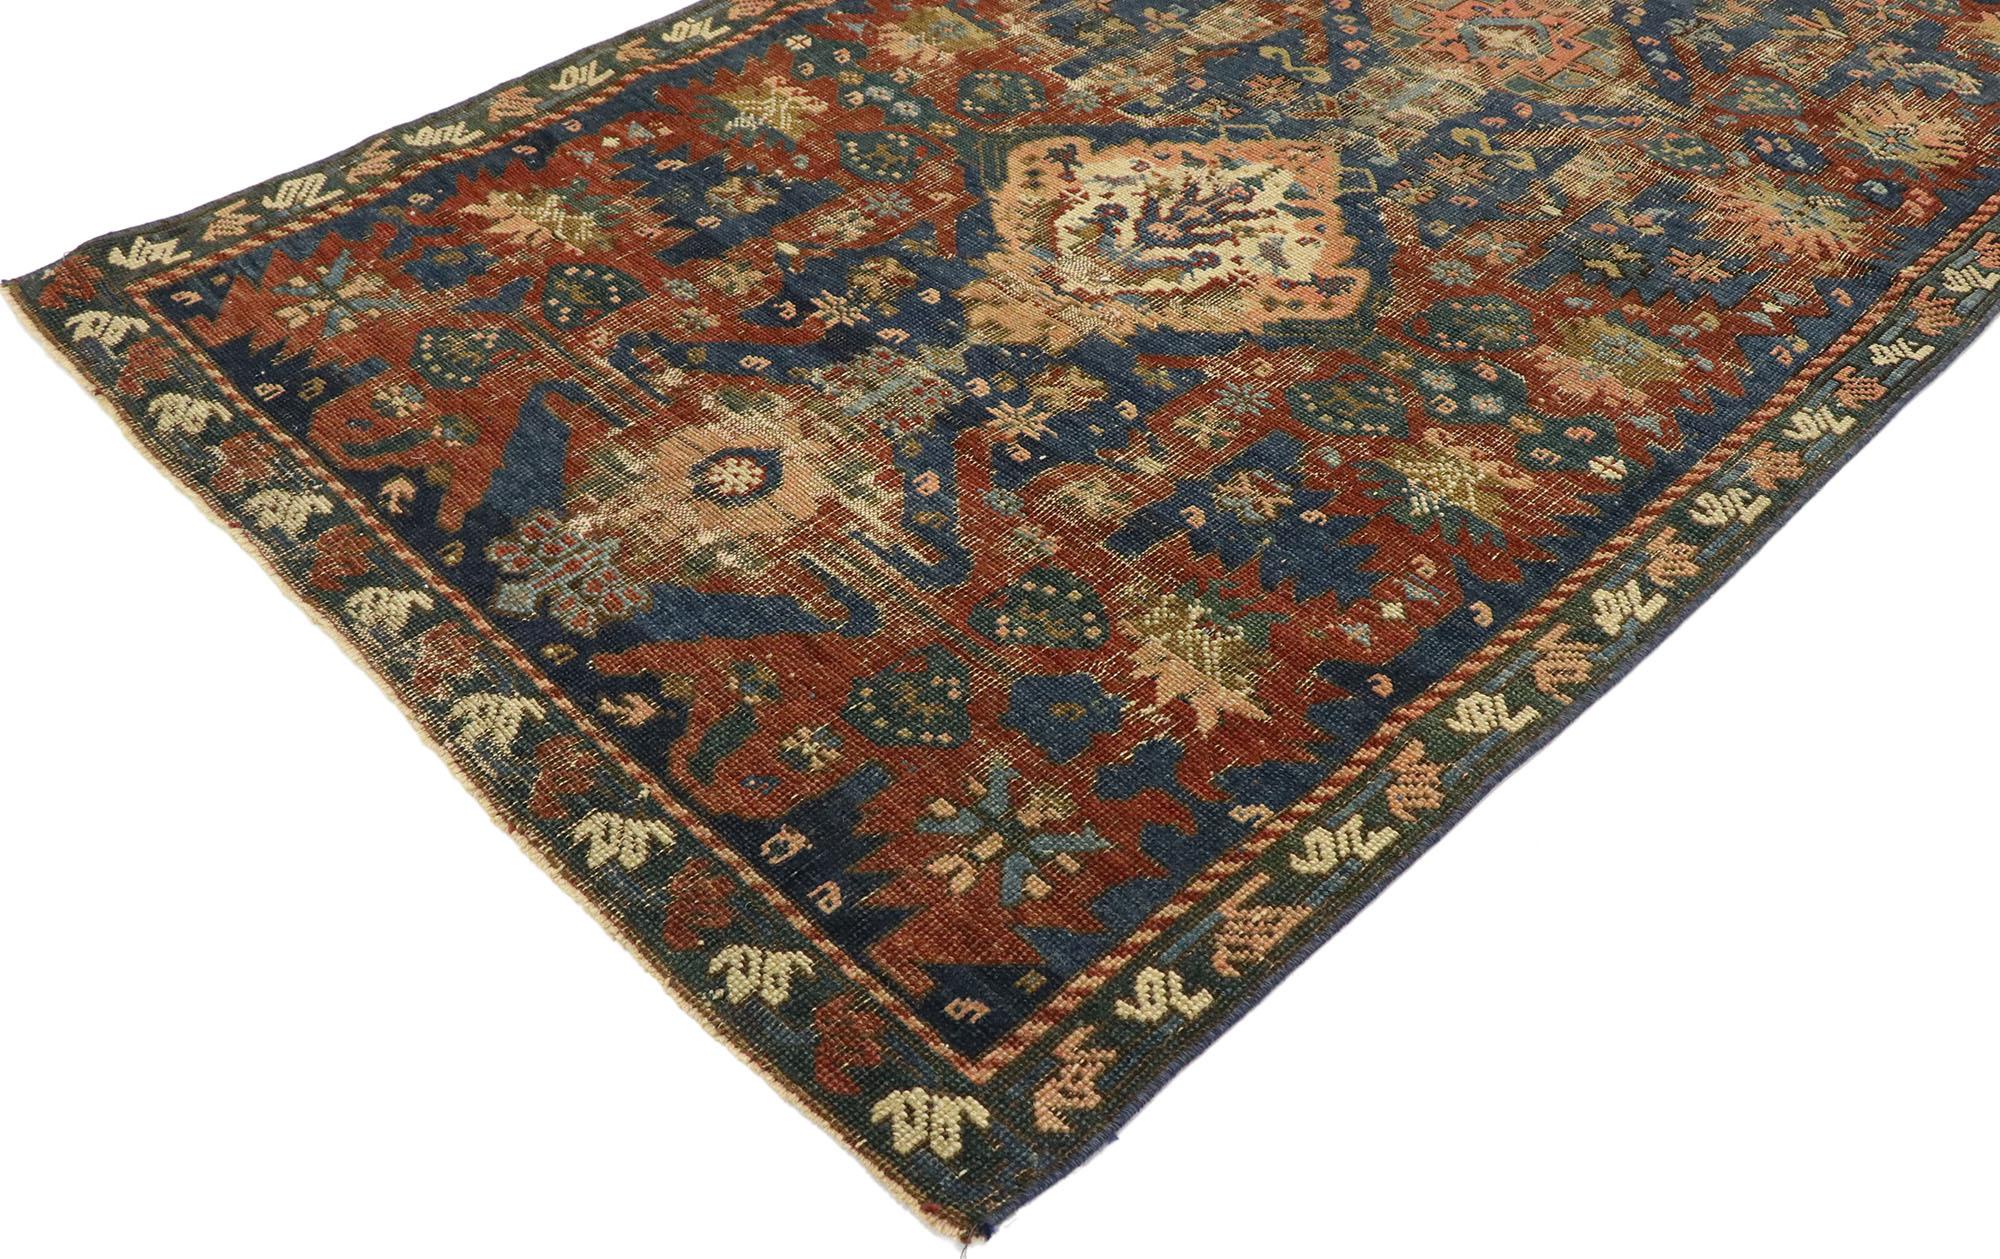 53050, distressed antique Turkish Oushak rug with Modern Rustic Industrial style. With its perfectly worn-in charm and rustic sensibility, this hand knotted wool distressed antique Turkish Oushak rug will take on a curated lived-in look that feels